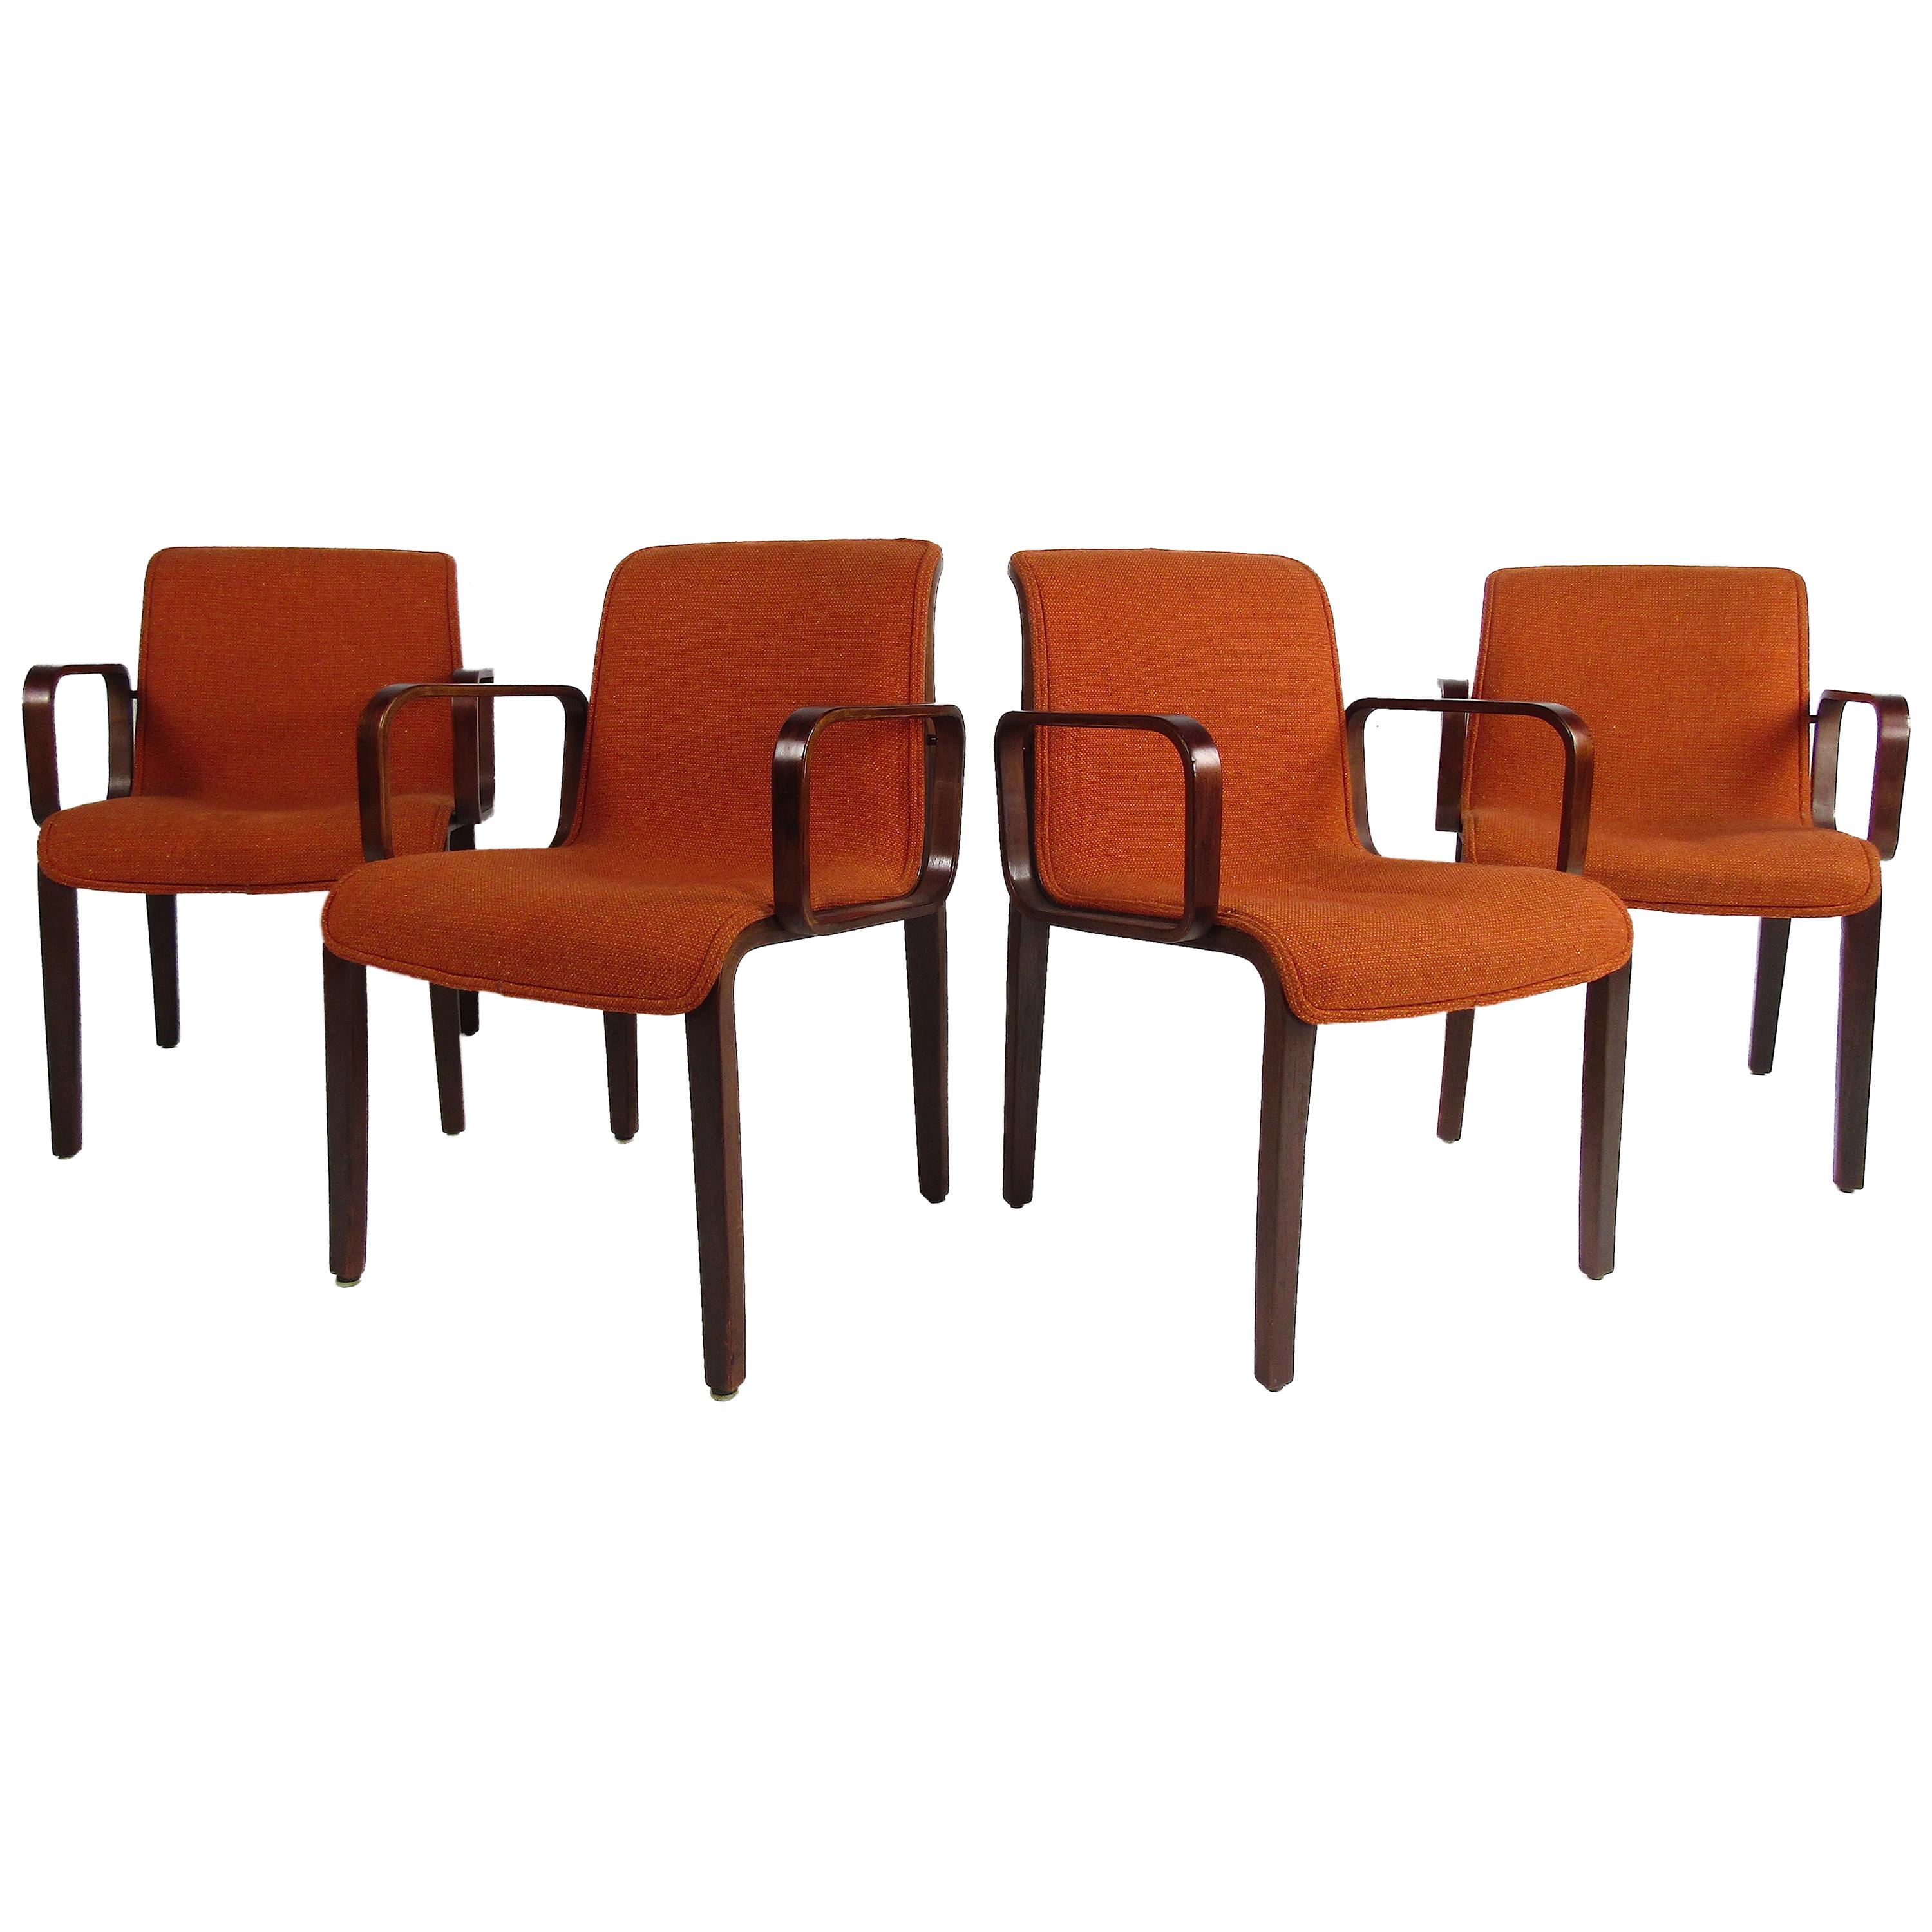 Midcentury Upholstered Dining Chairs after Knoll, Set of 4